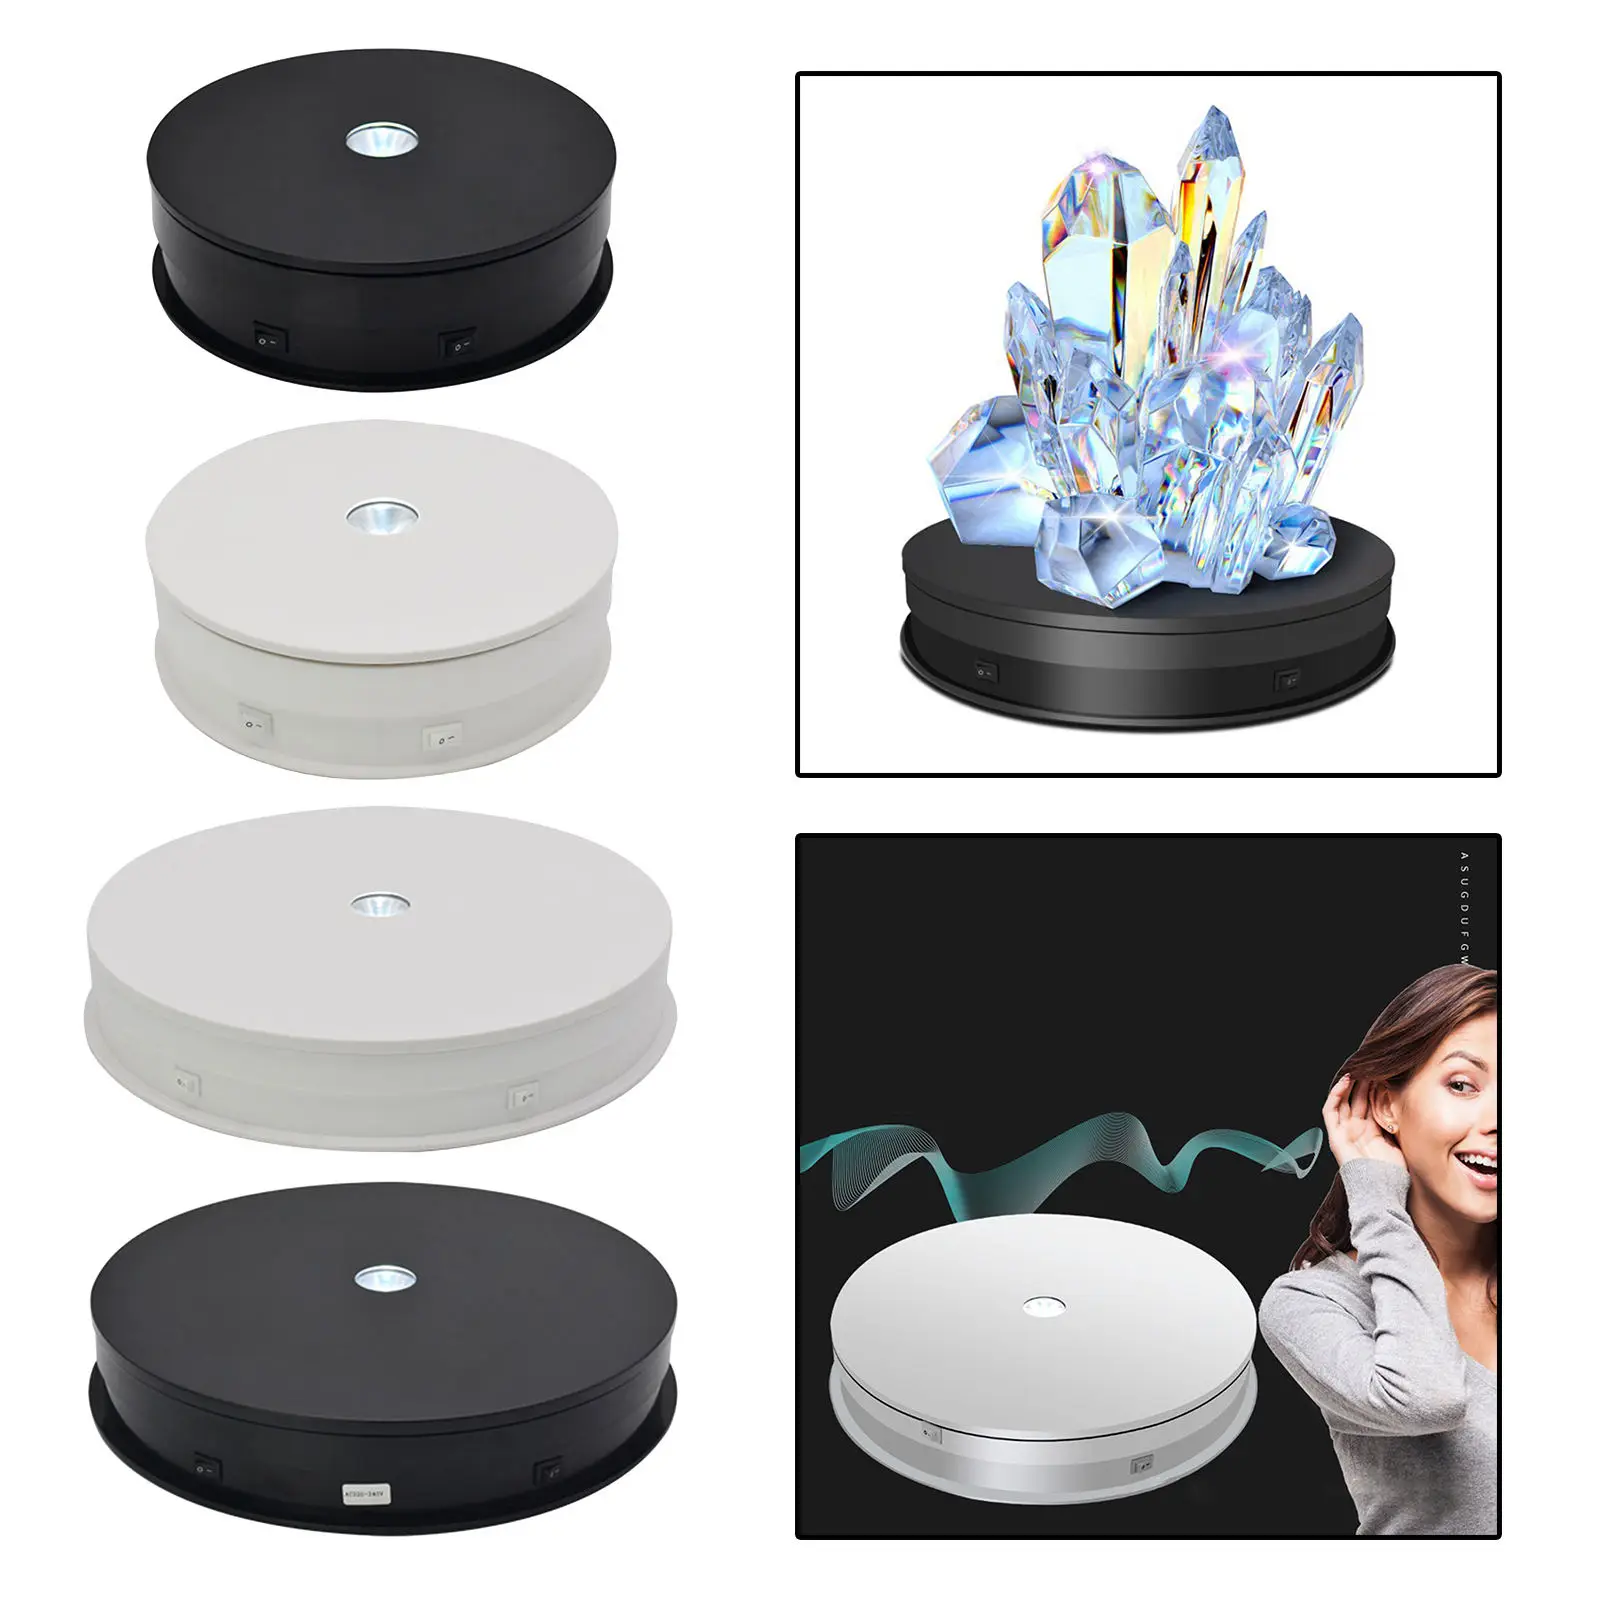 Stylish Top Electric Motorized Rotary Rotating Display Turntable Max Load 25kg for Jewelry Model Display Stand